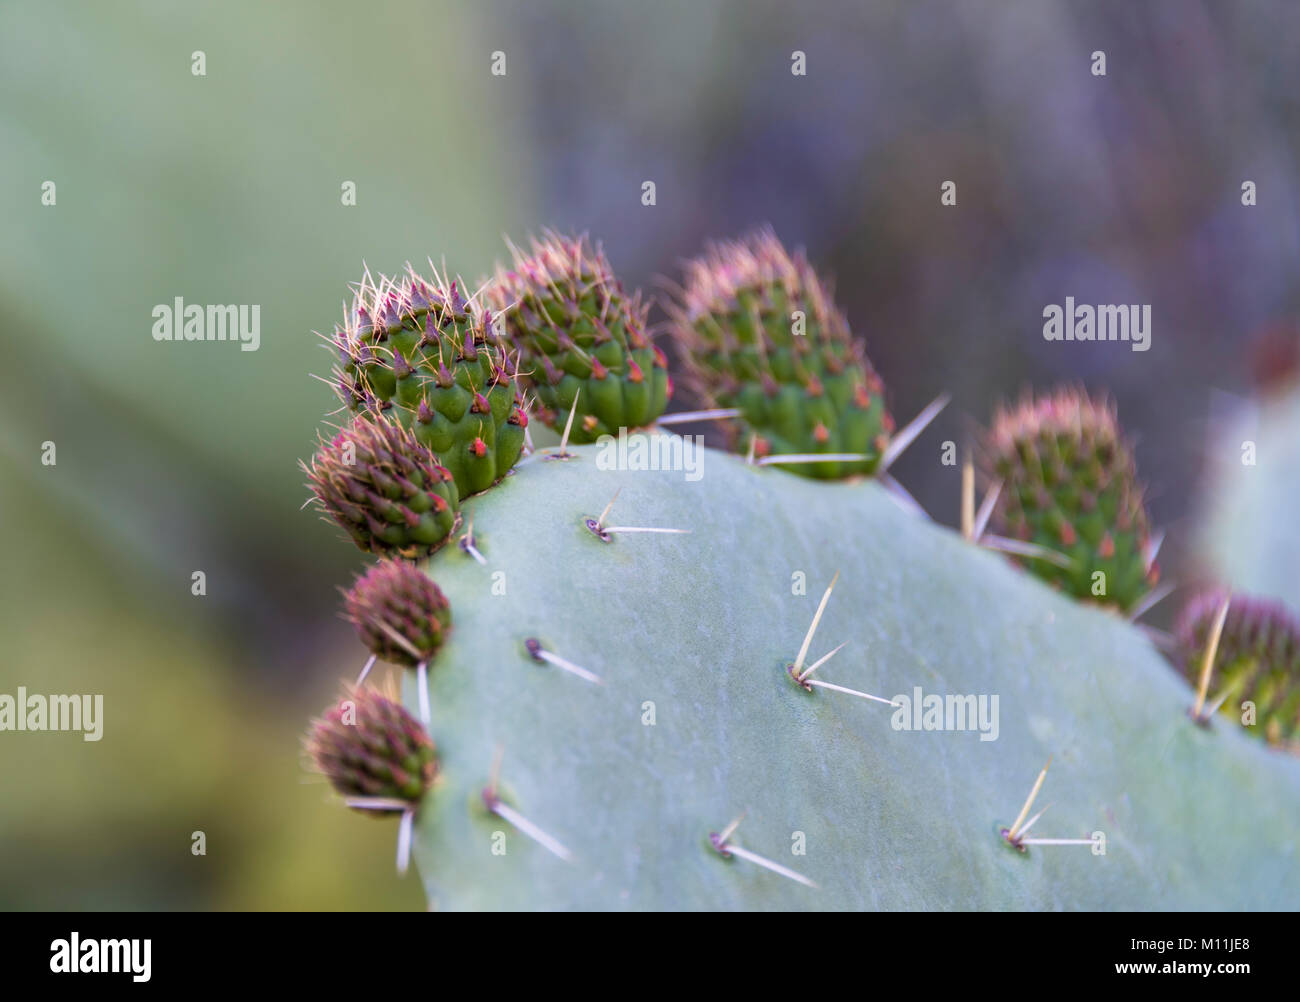 Close up image of Sicilian Cactus flower in bloom, also known as Opuntia ficus-indica or Cactus pear Stock Photo